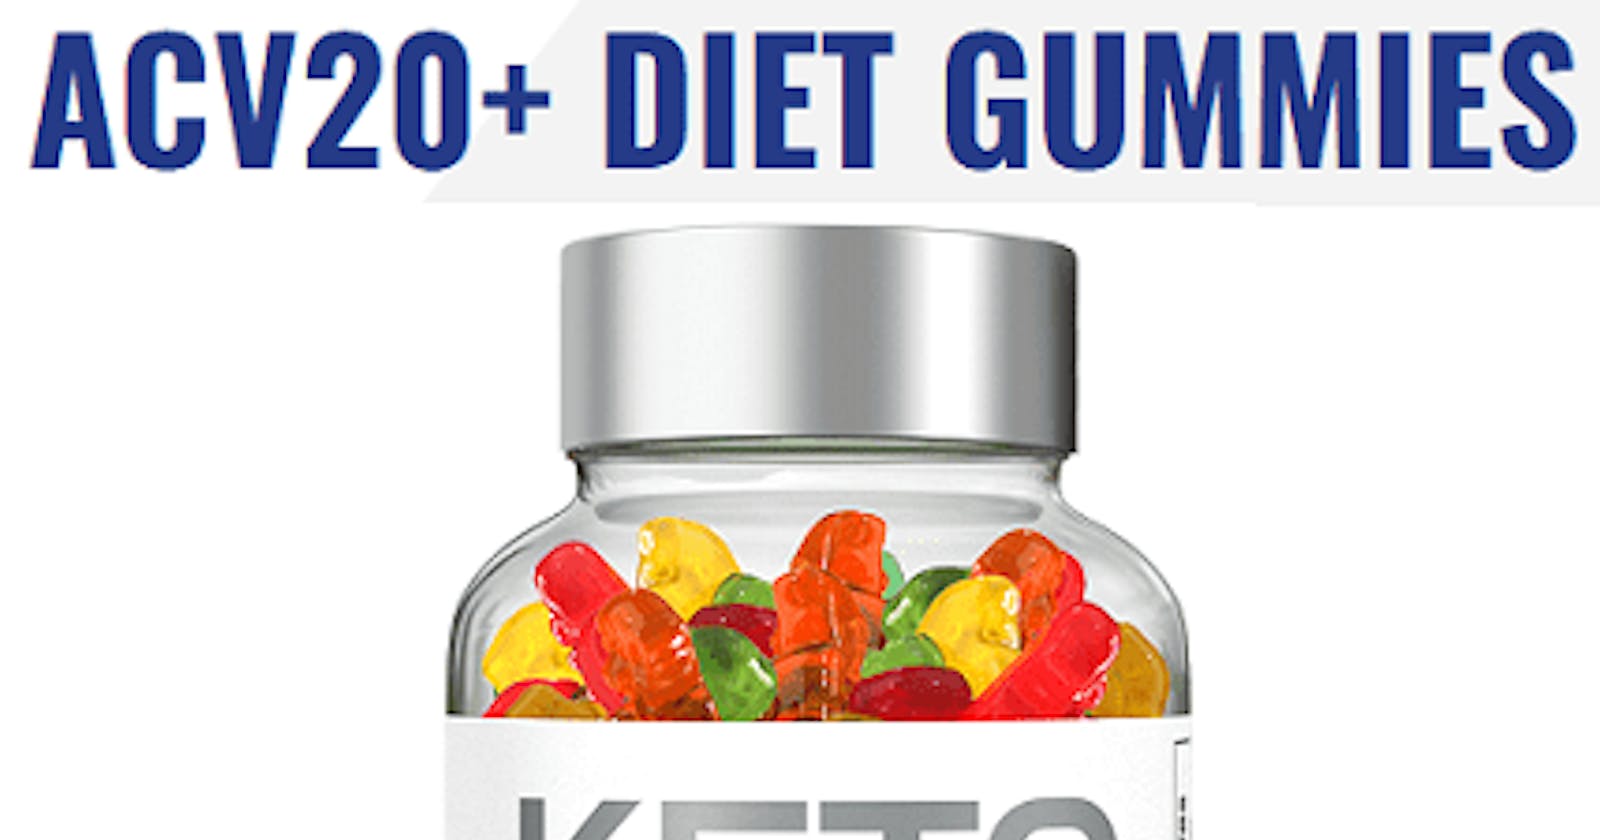 Tasty and Nutritious: Our Keto ACV 20 Gummies